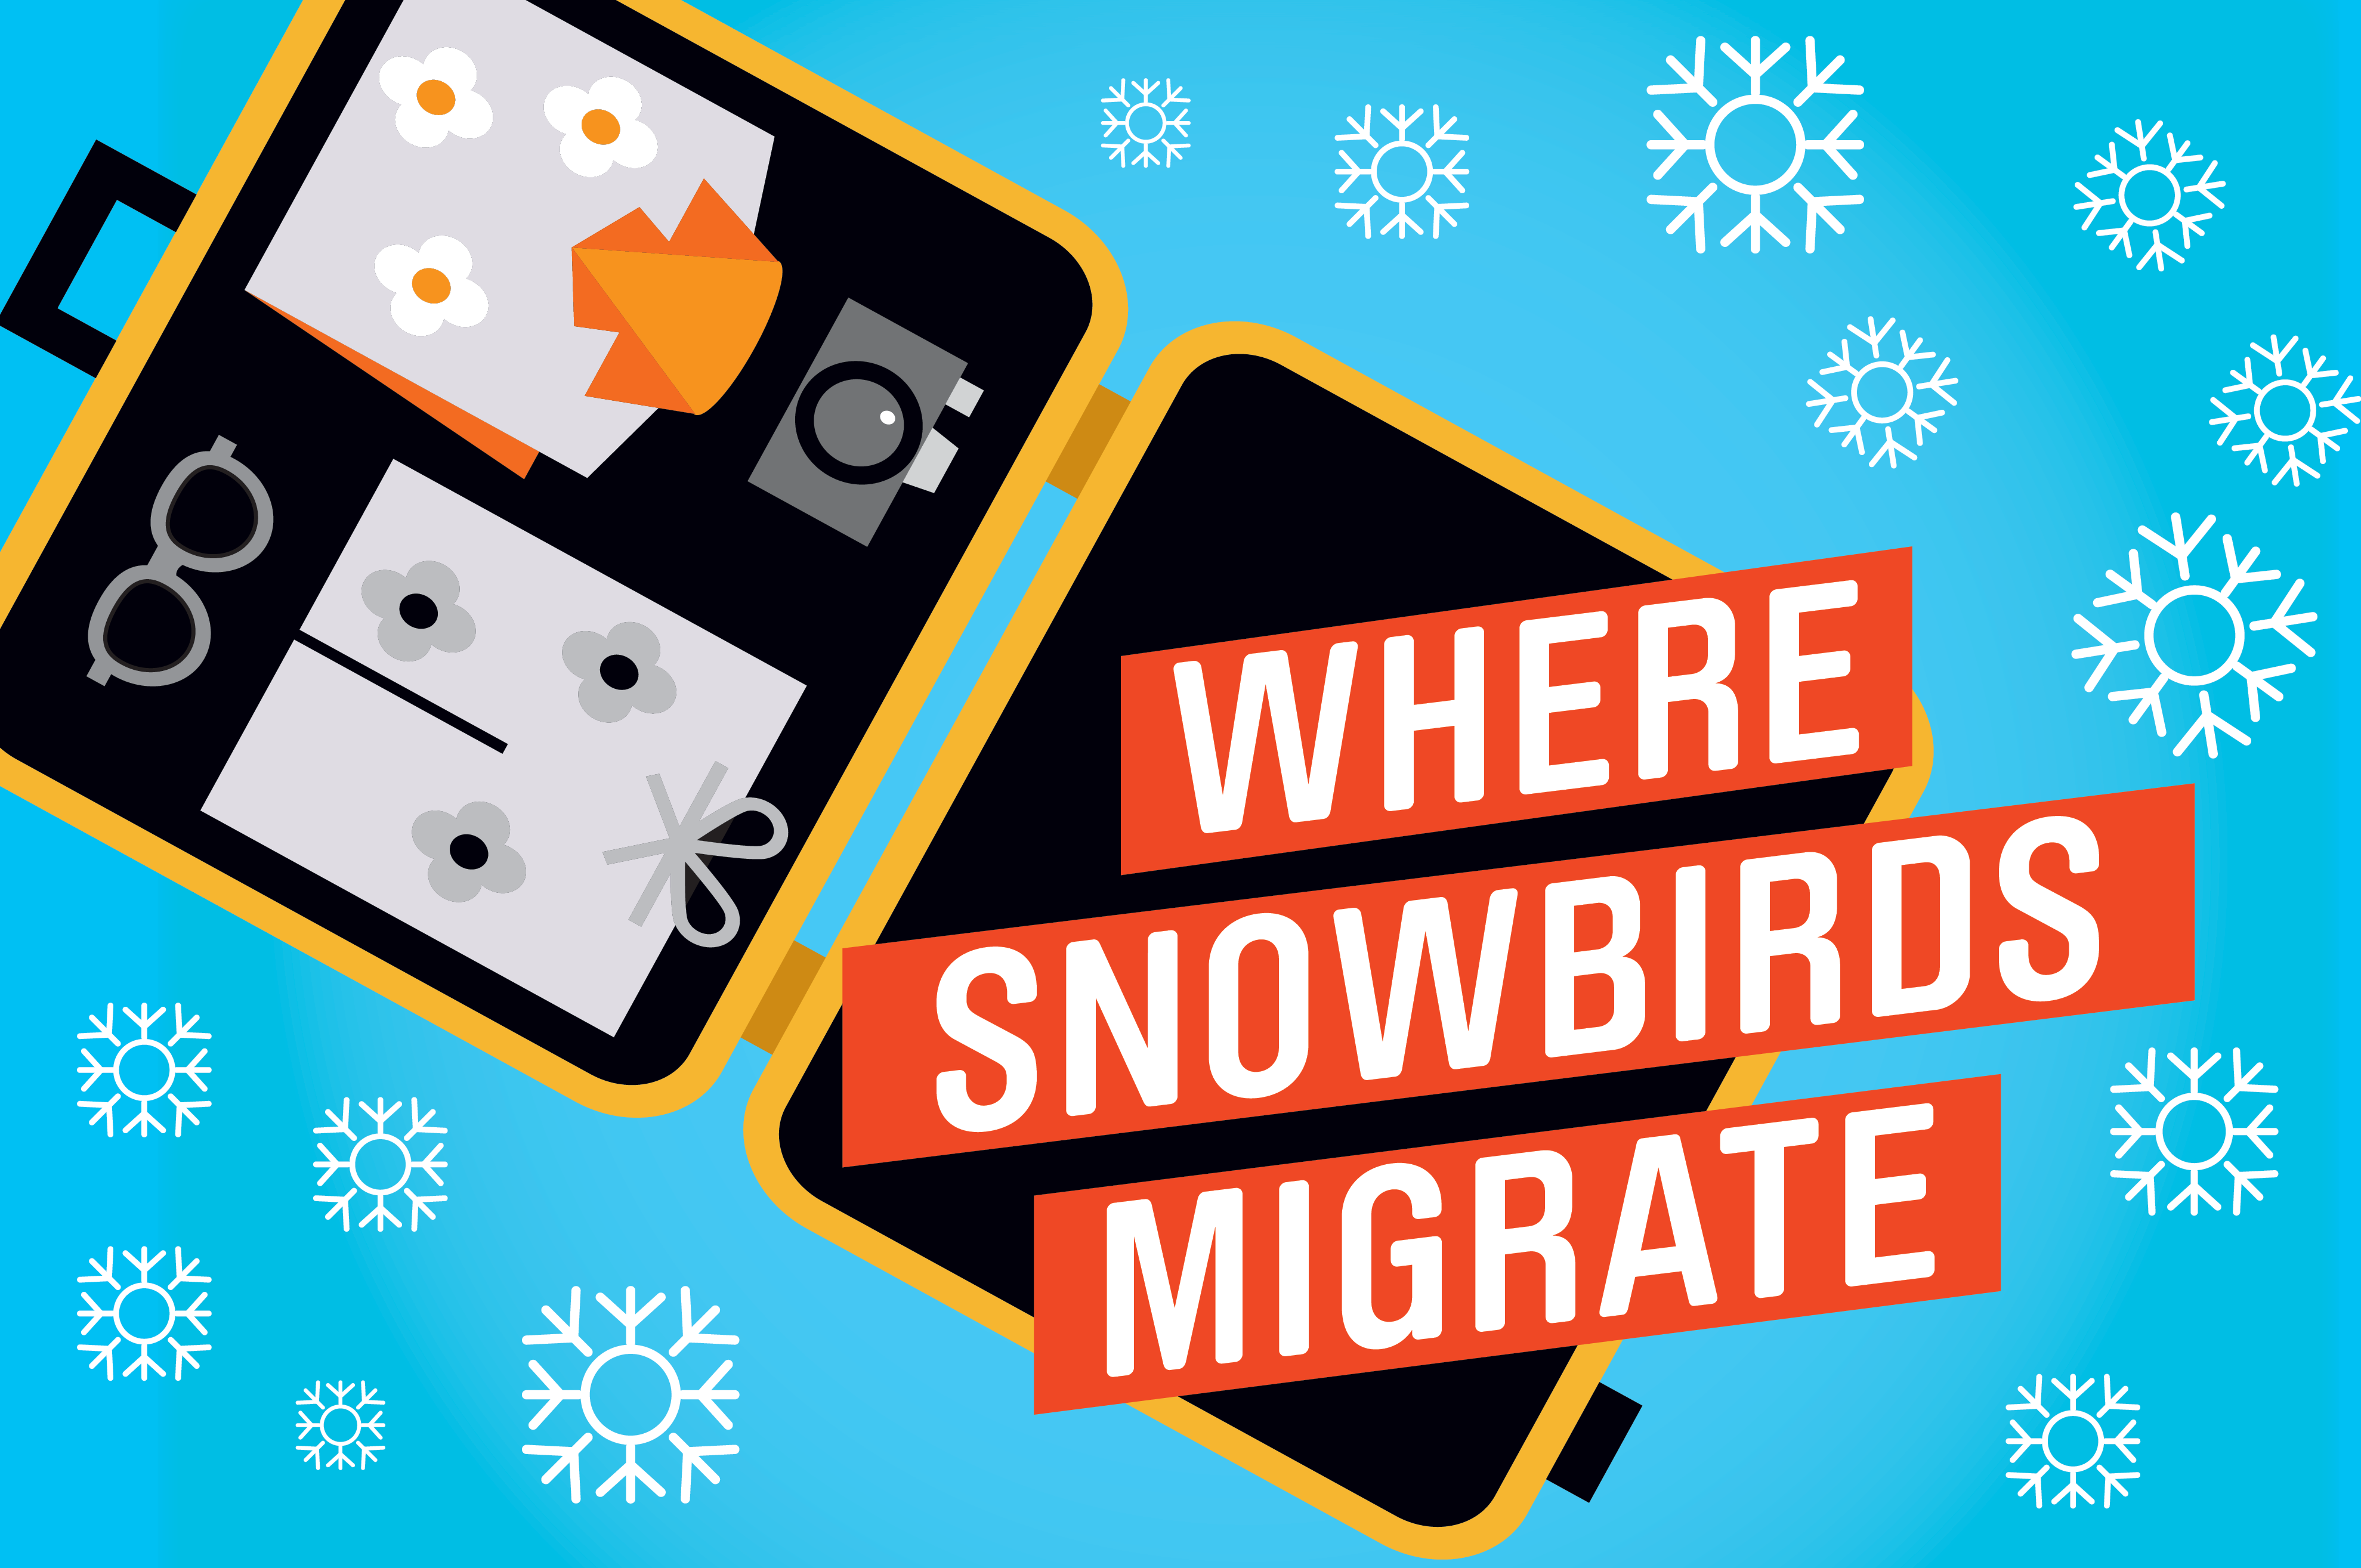 Here's Where 'Snowbird' Retirees Migrate When It Gets Cold